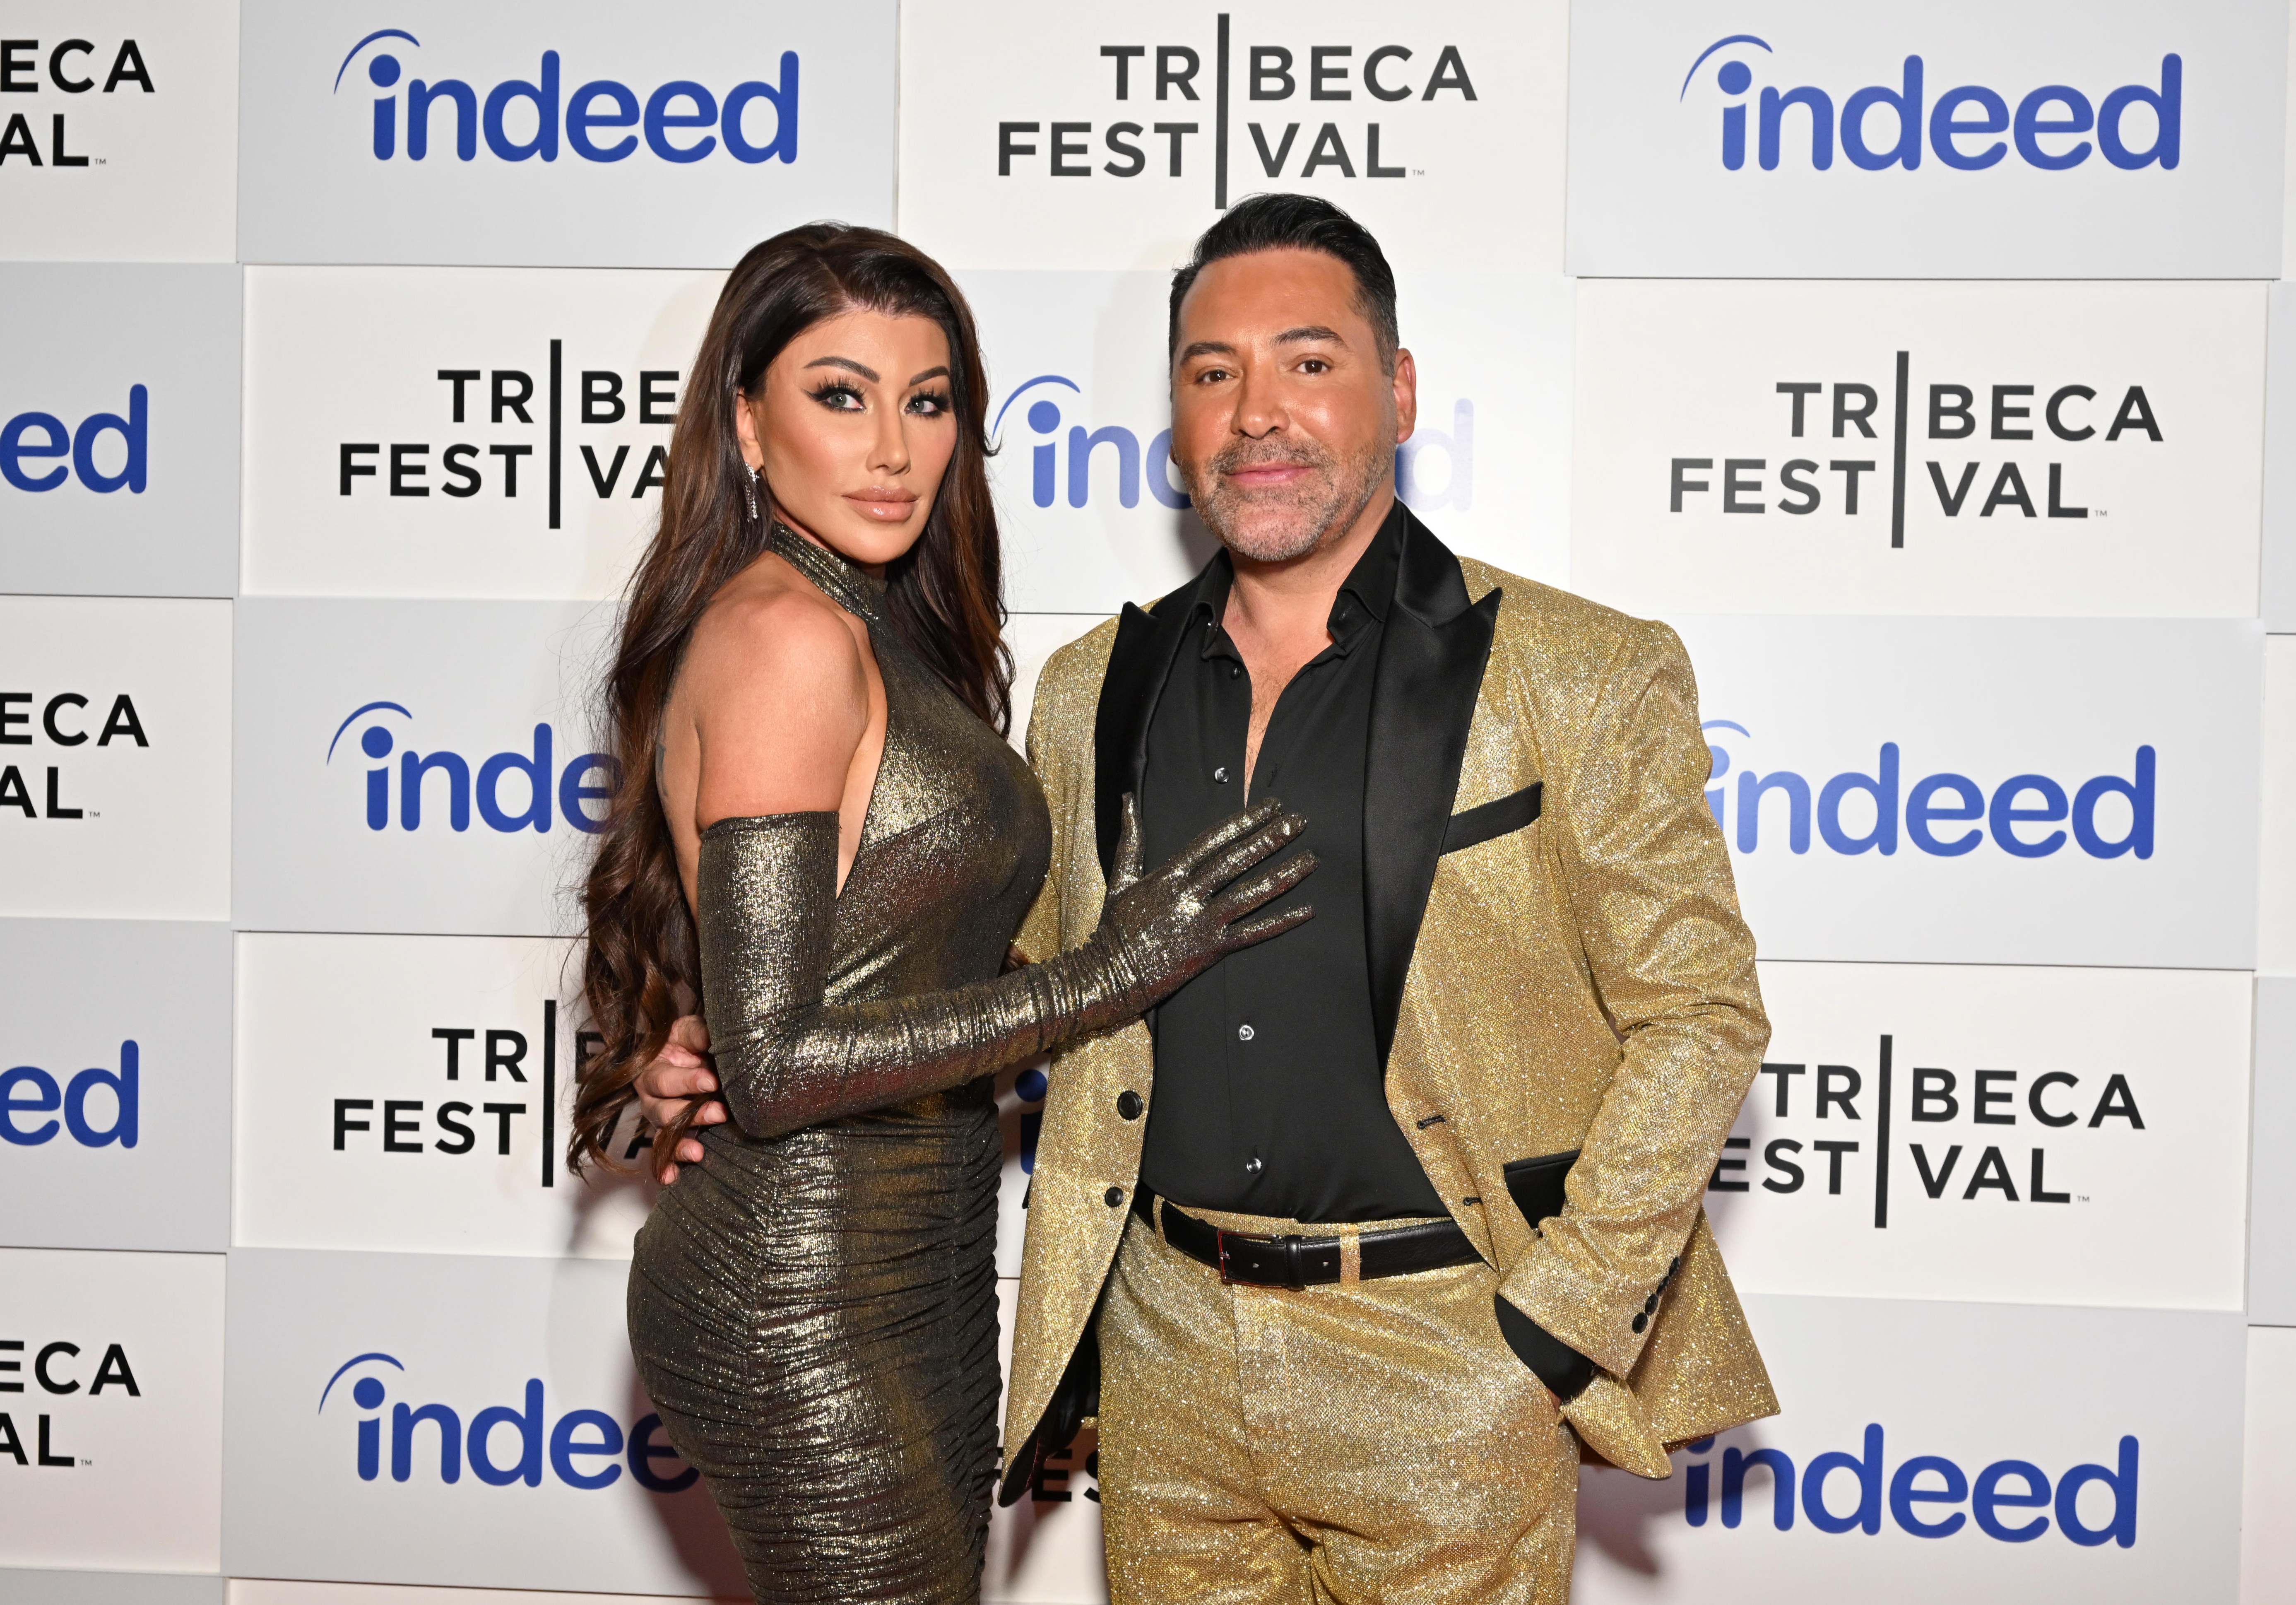 Holly Sonders and Oscar De La Hoya attend The HBO Sports Documentary "The Golden Boy" premiere at the Tribeca Festival 2023, on June 9, 2023, in New York City. | Source: Getty Images